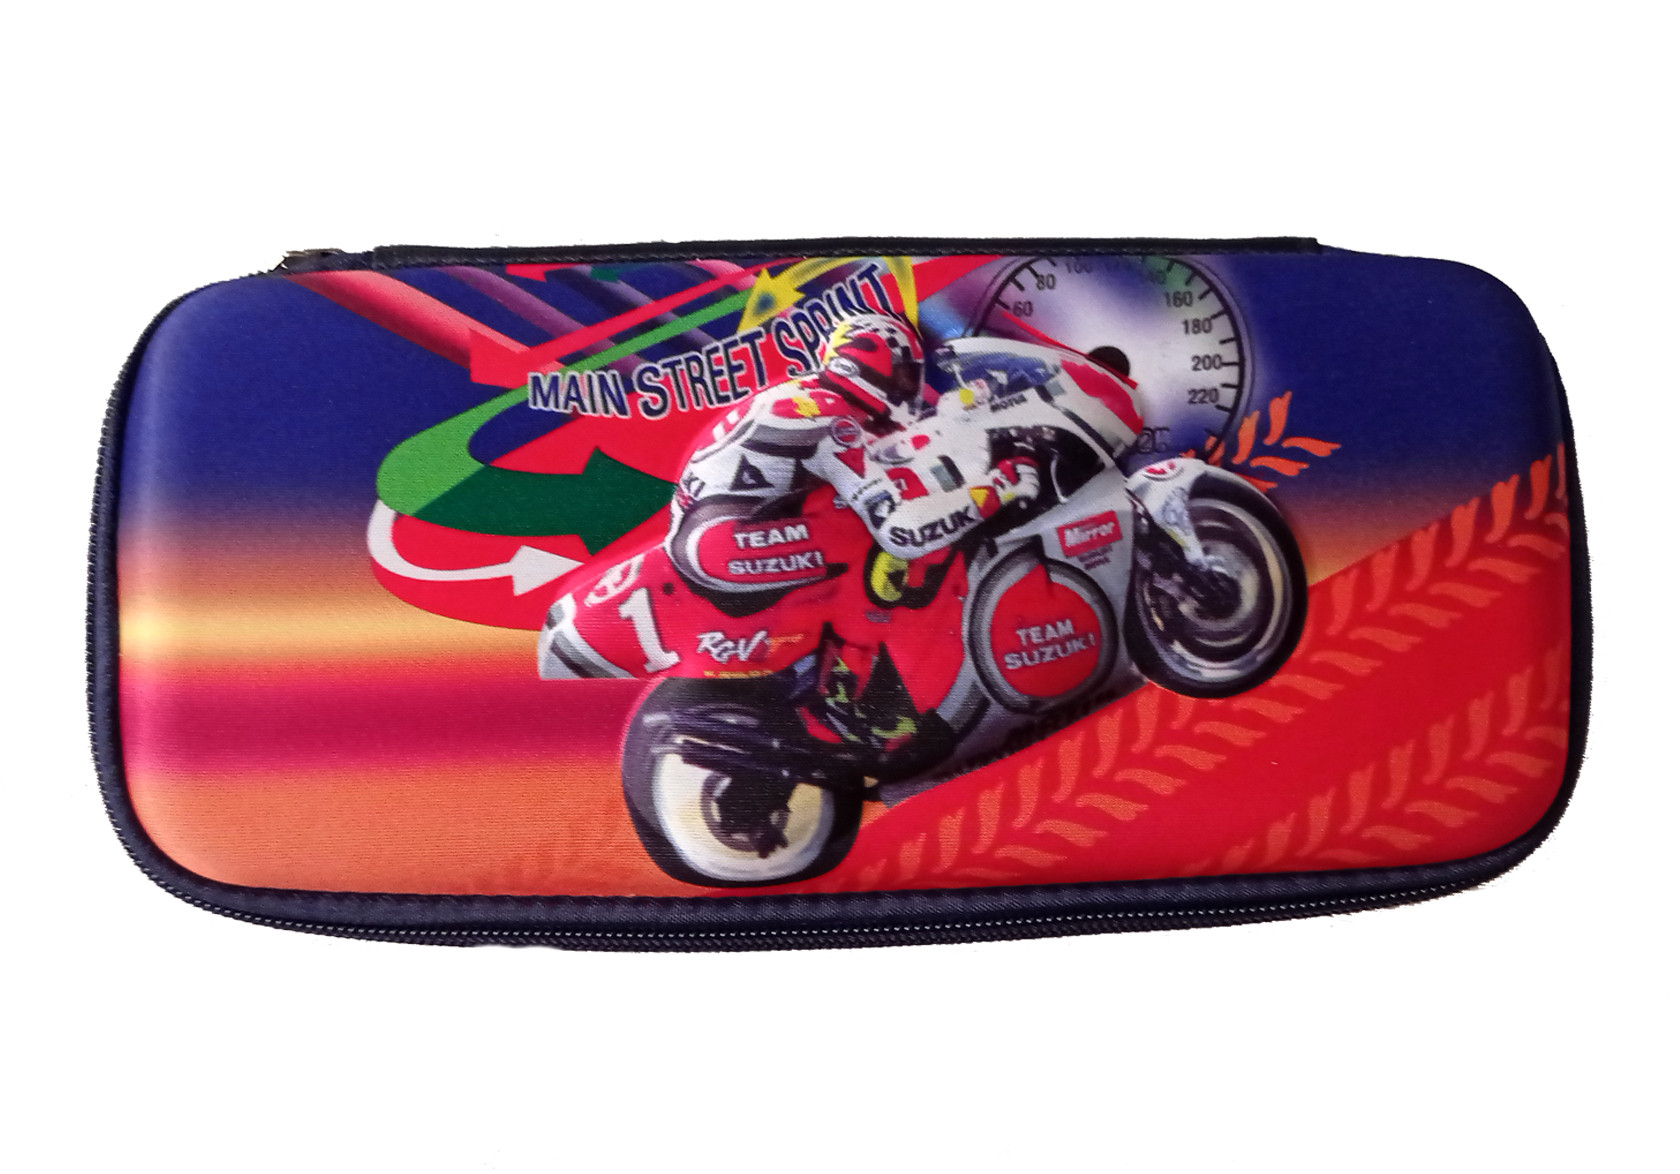 Kuber Industries Embossed Bike Design Strong Pencil Box for School Supplies, Multi Purpose Pencil Box With Secure Zipper Closure (Multi)-HS_38_KUBMART21115